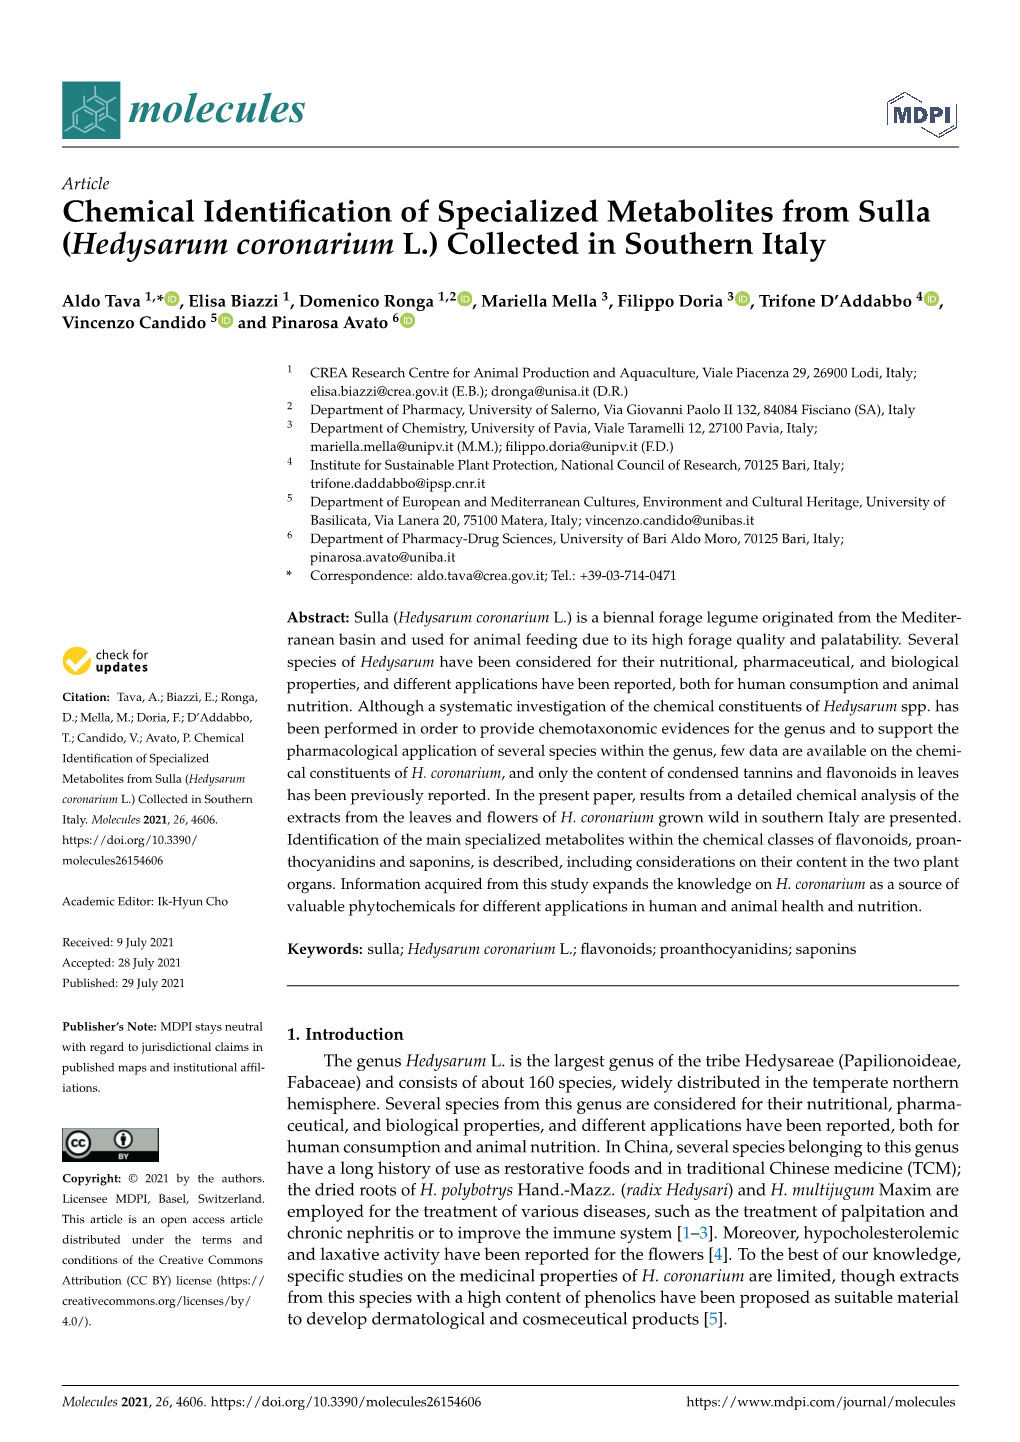 Chemical Identification of Specialized Metabolites from Sulla (Hedysarum